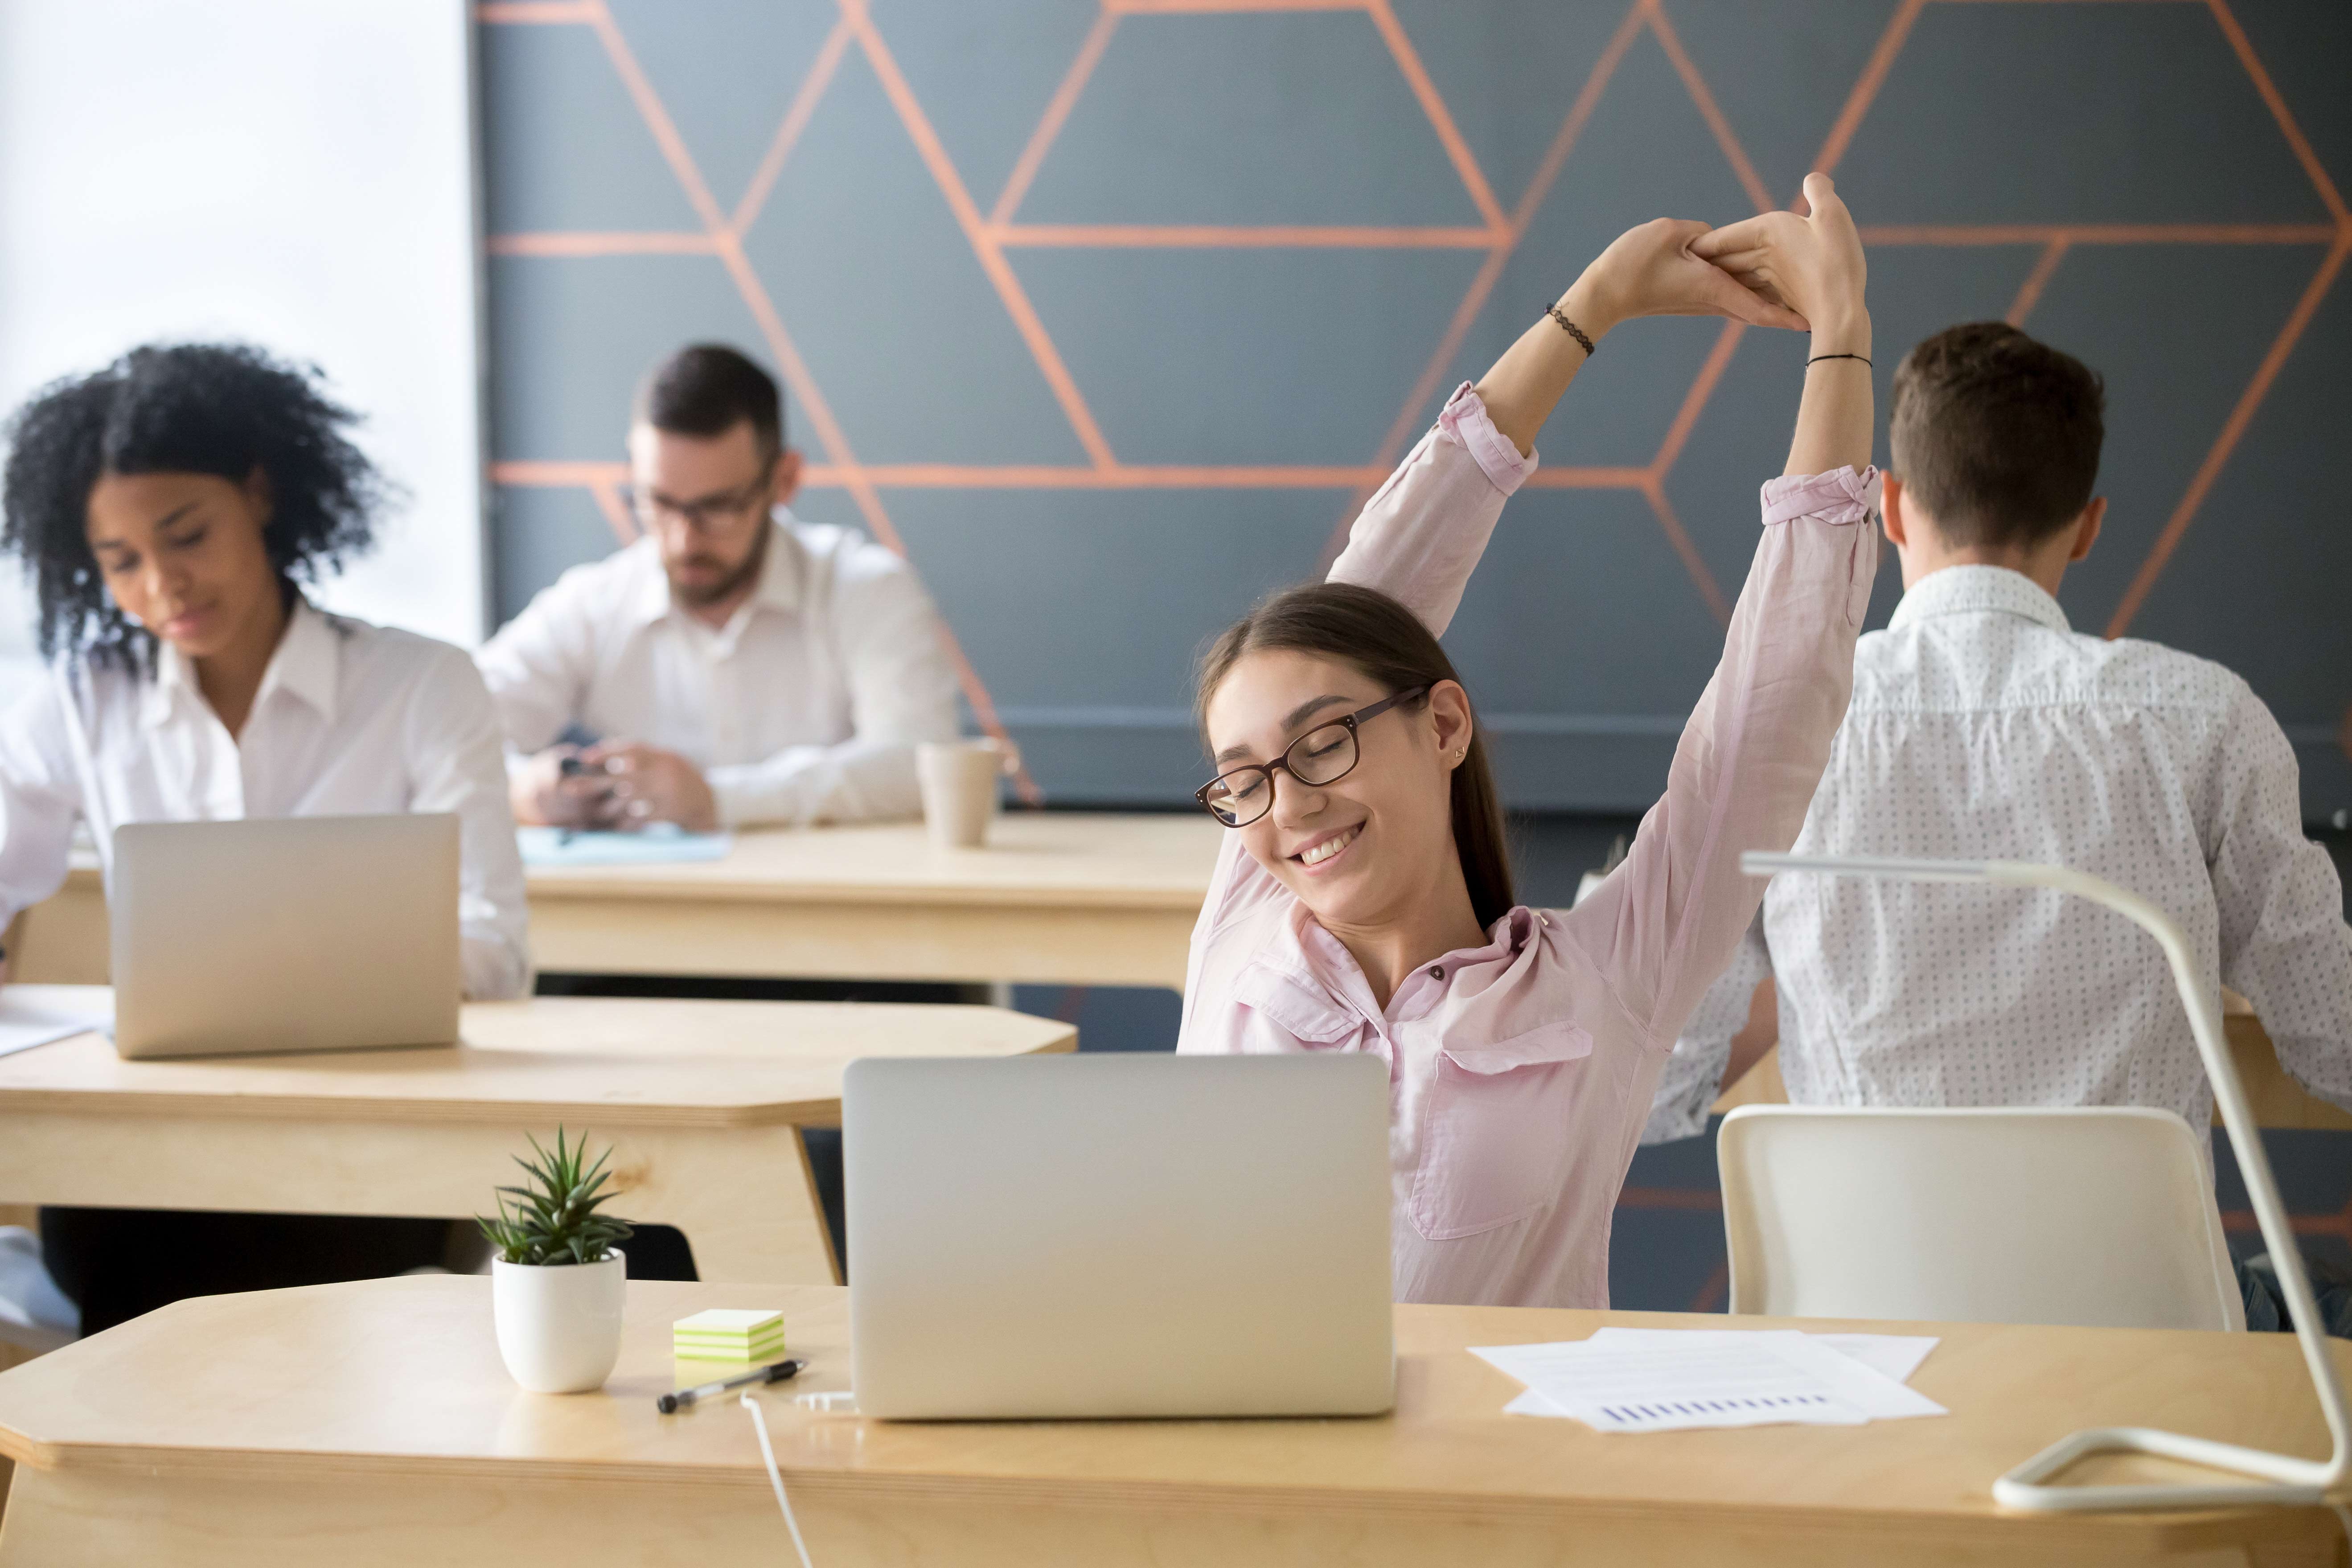 millennial employee stretching taking break from computer work relaxation